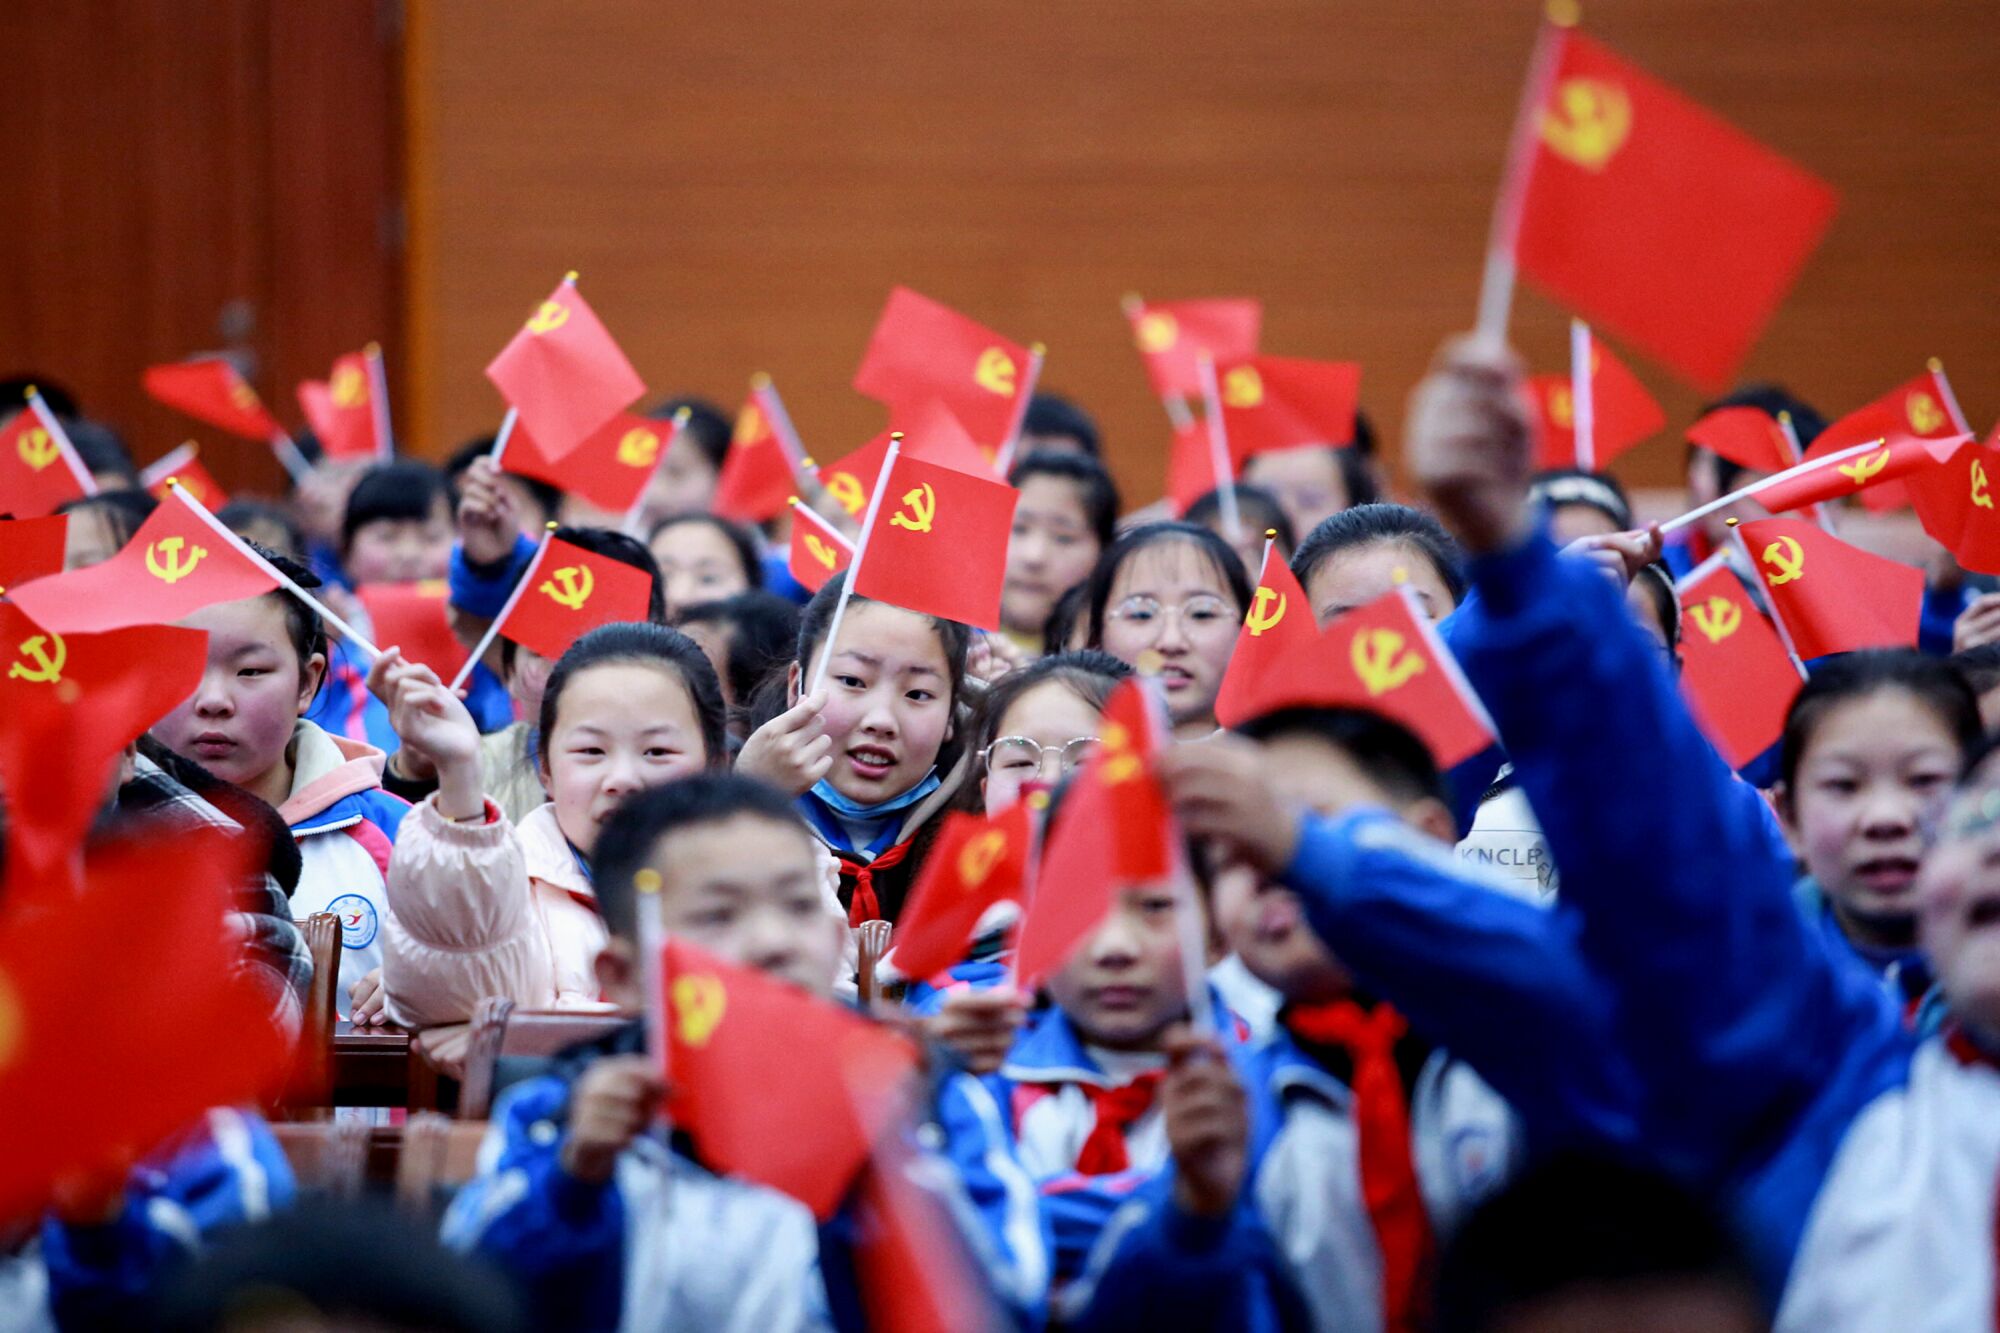 A big group of children wave red flags bearing yellow hammer and sickle symbol in corner